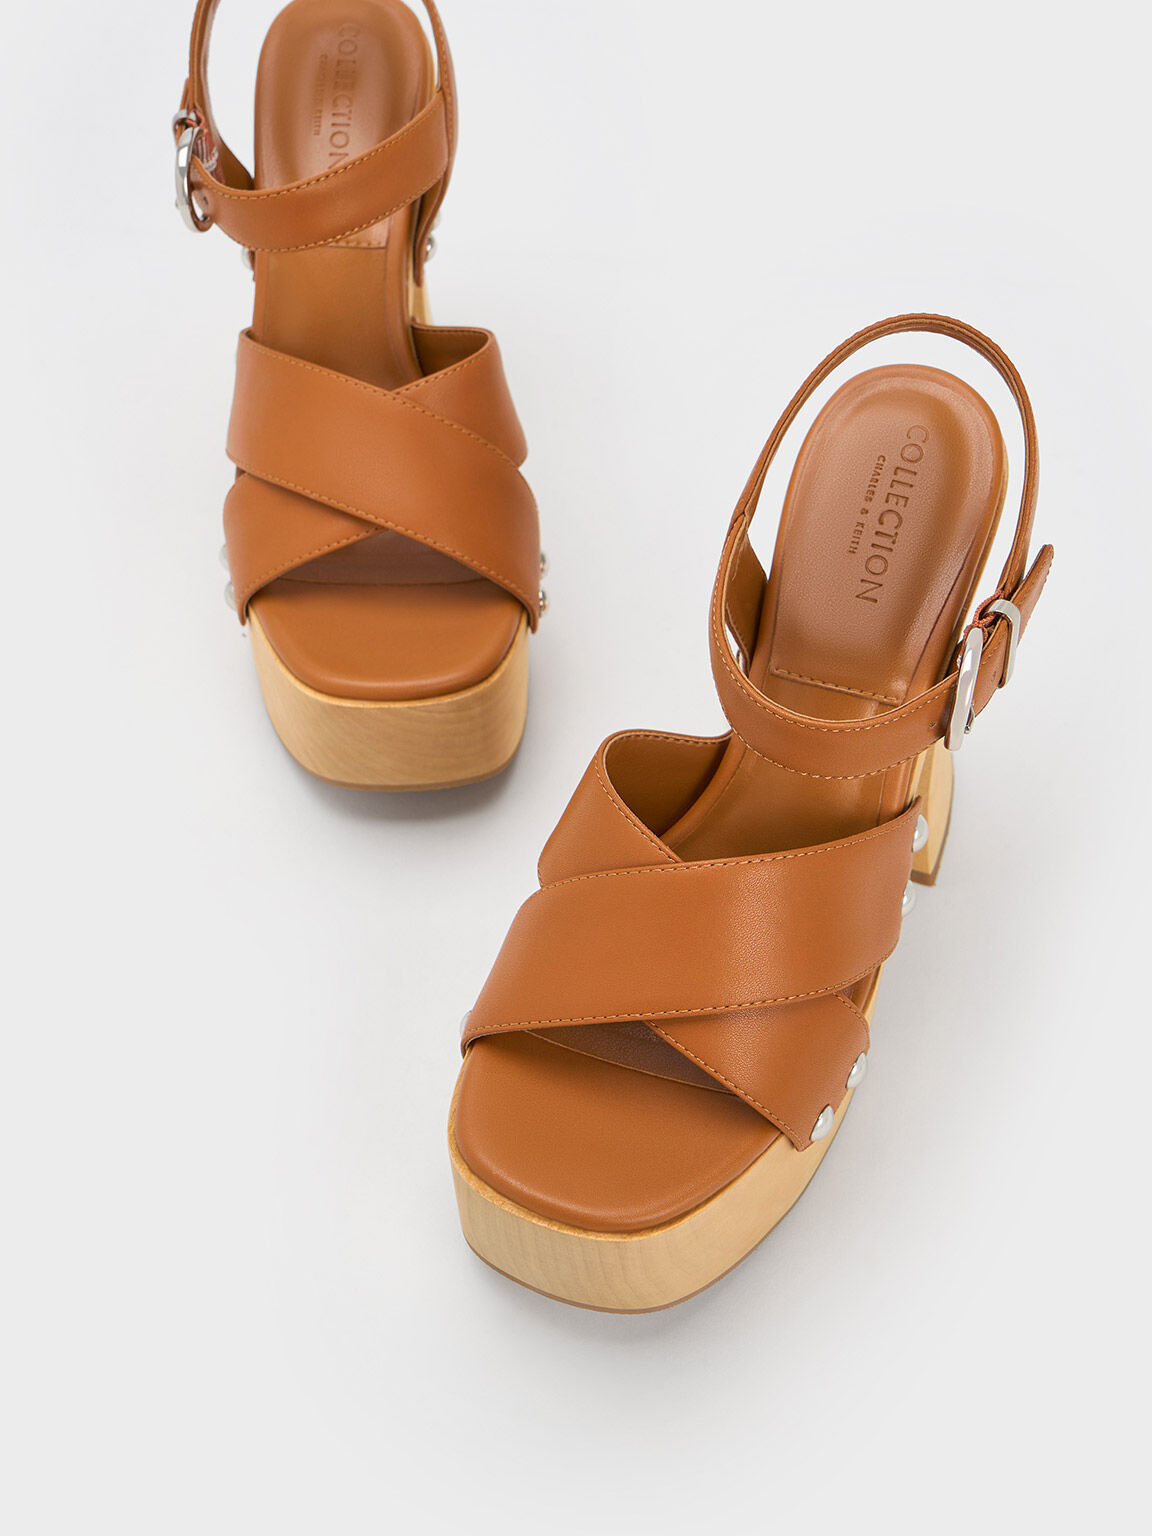 Sandal Crossover Leather Tabitha, Brown, hi-res